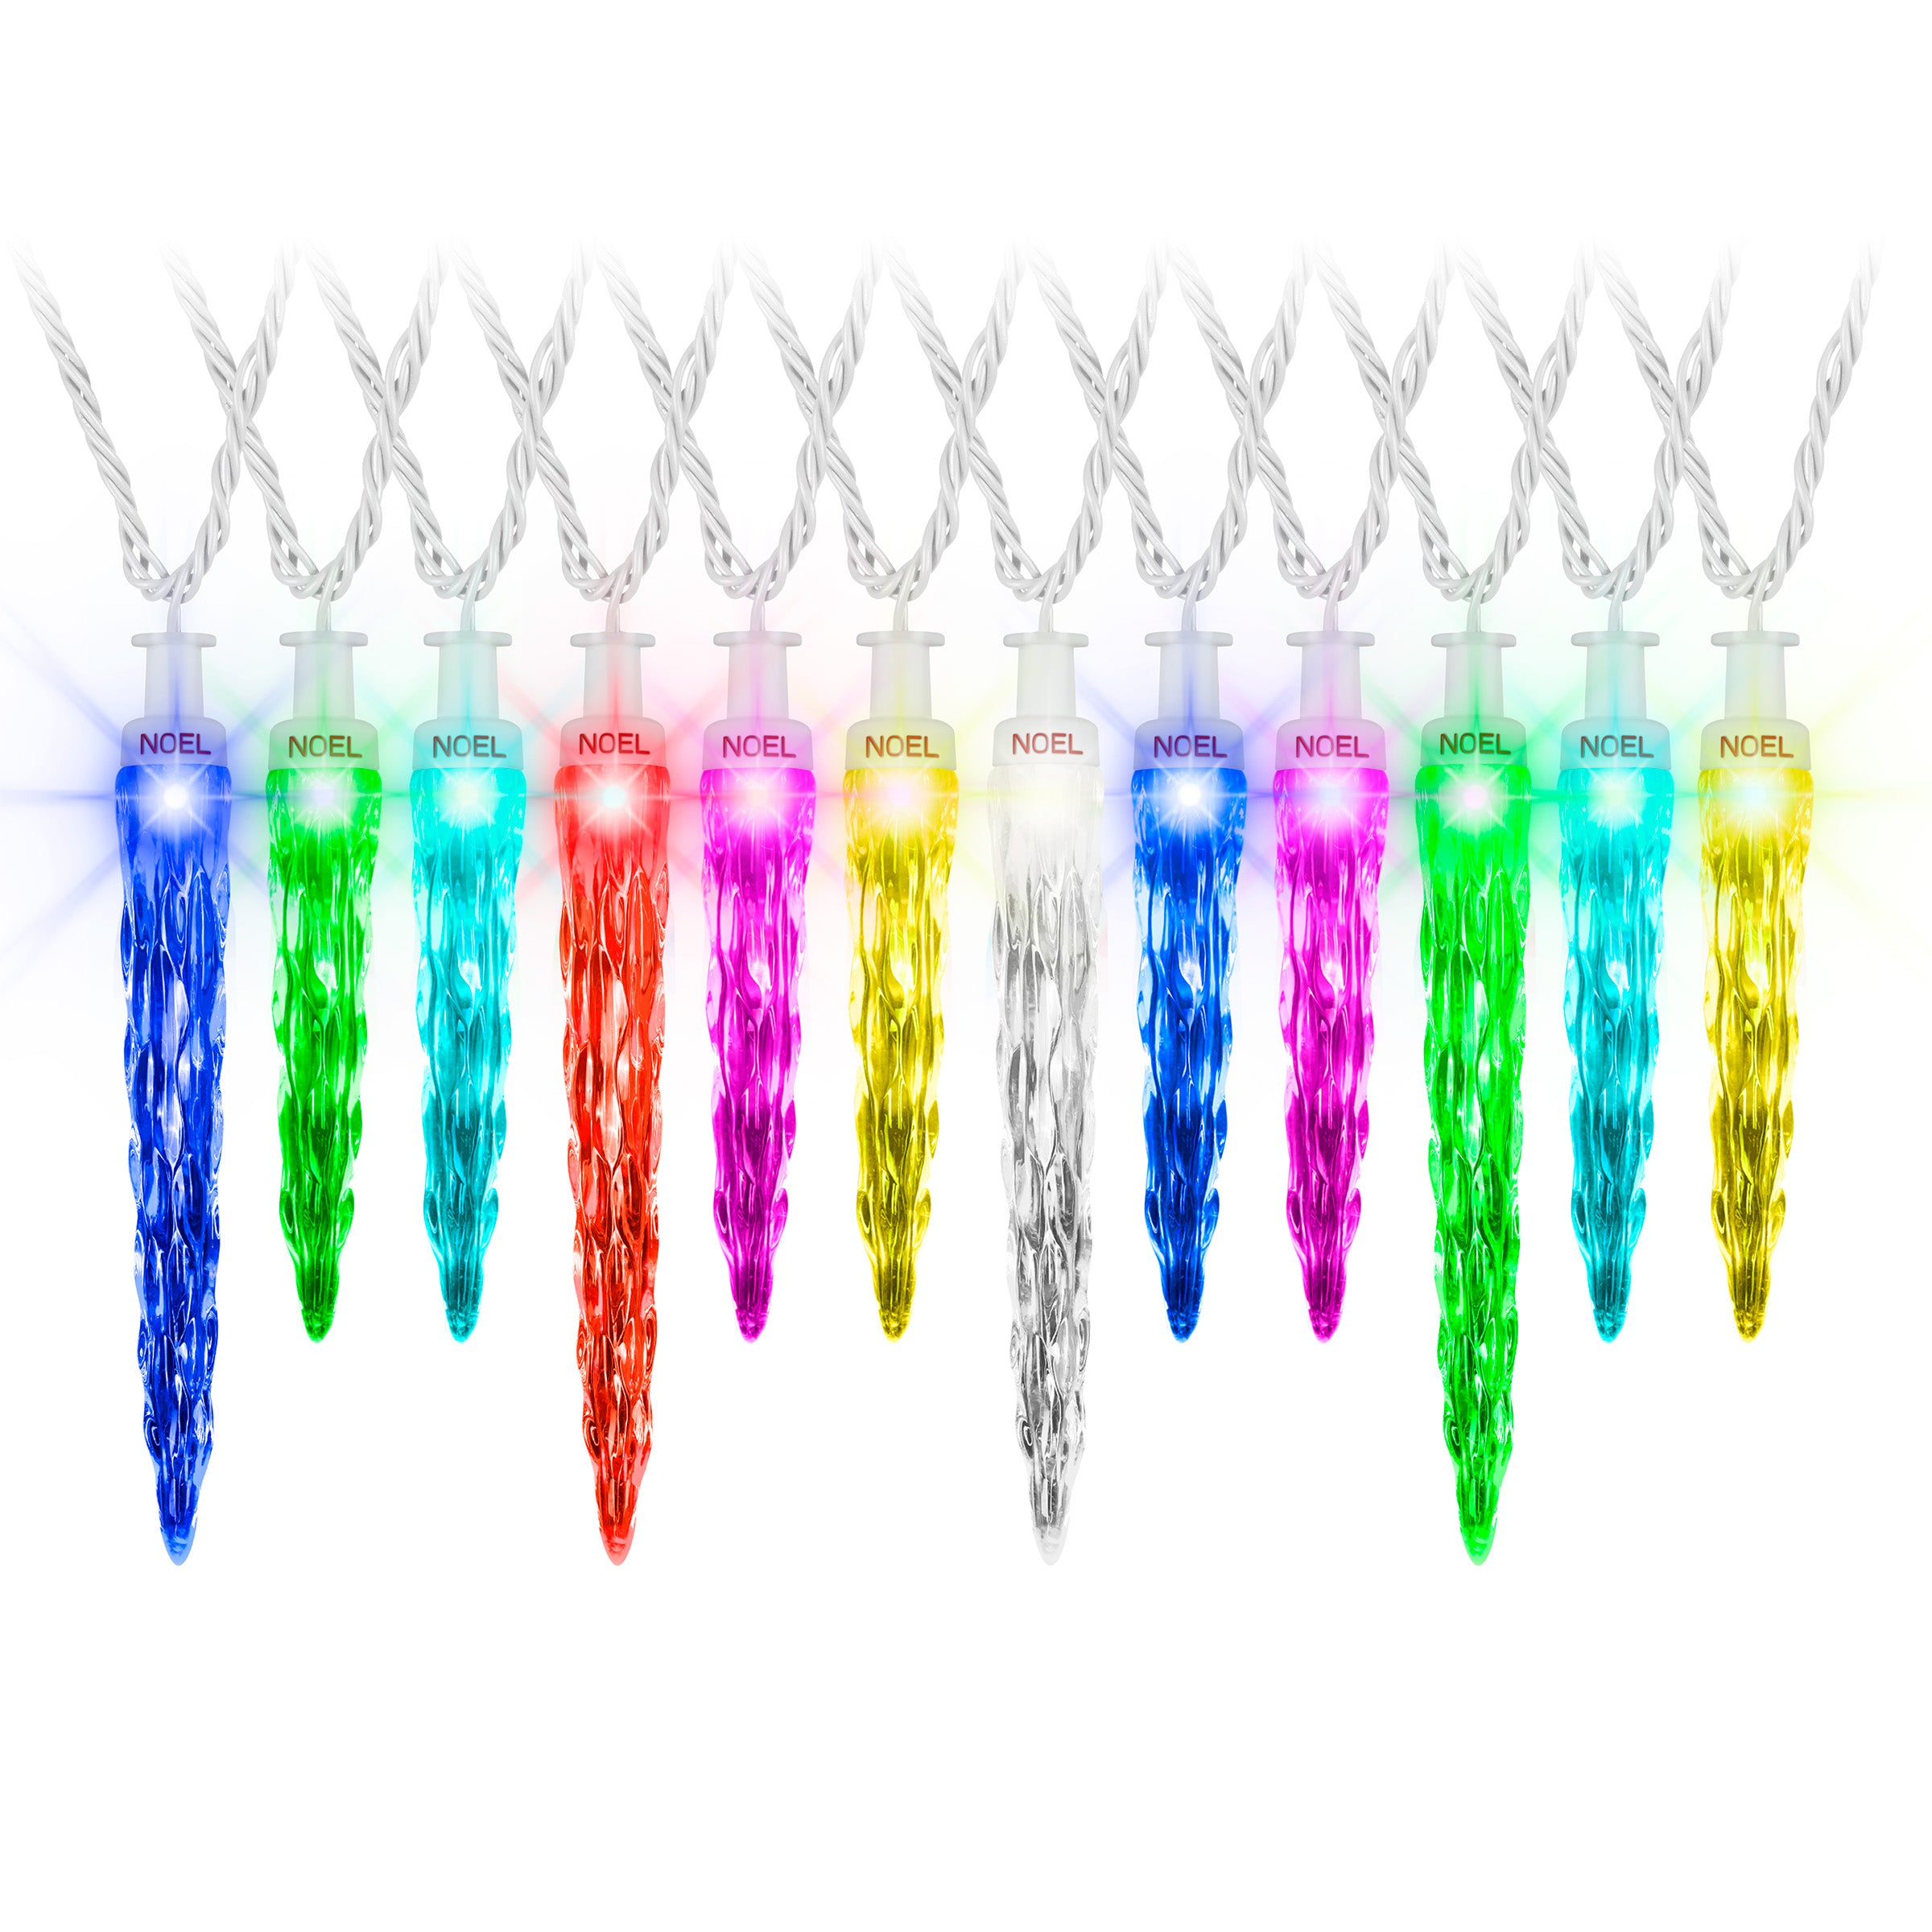 Christmas ColorMotion Light String-Icicle-S/24-7"5"5" (Multi)